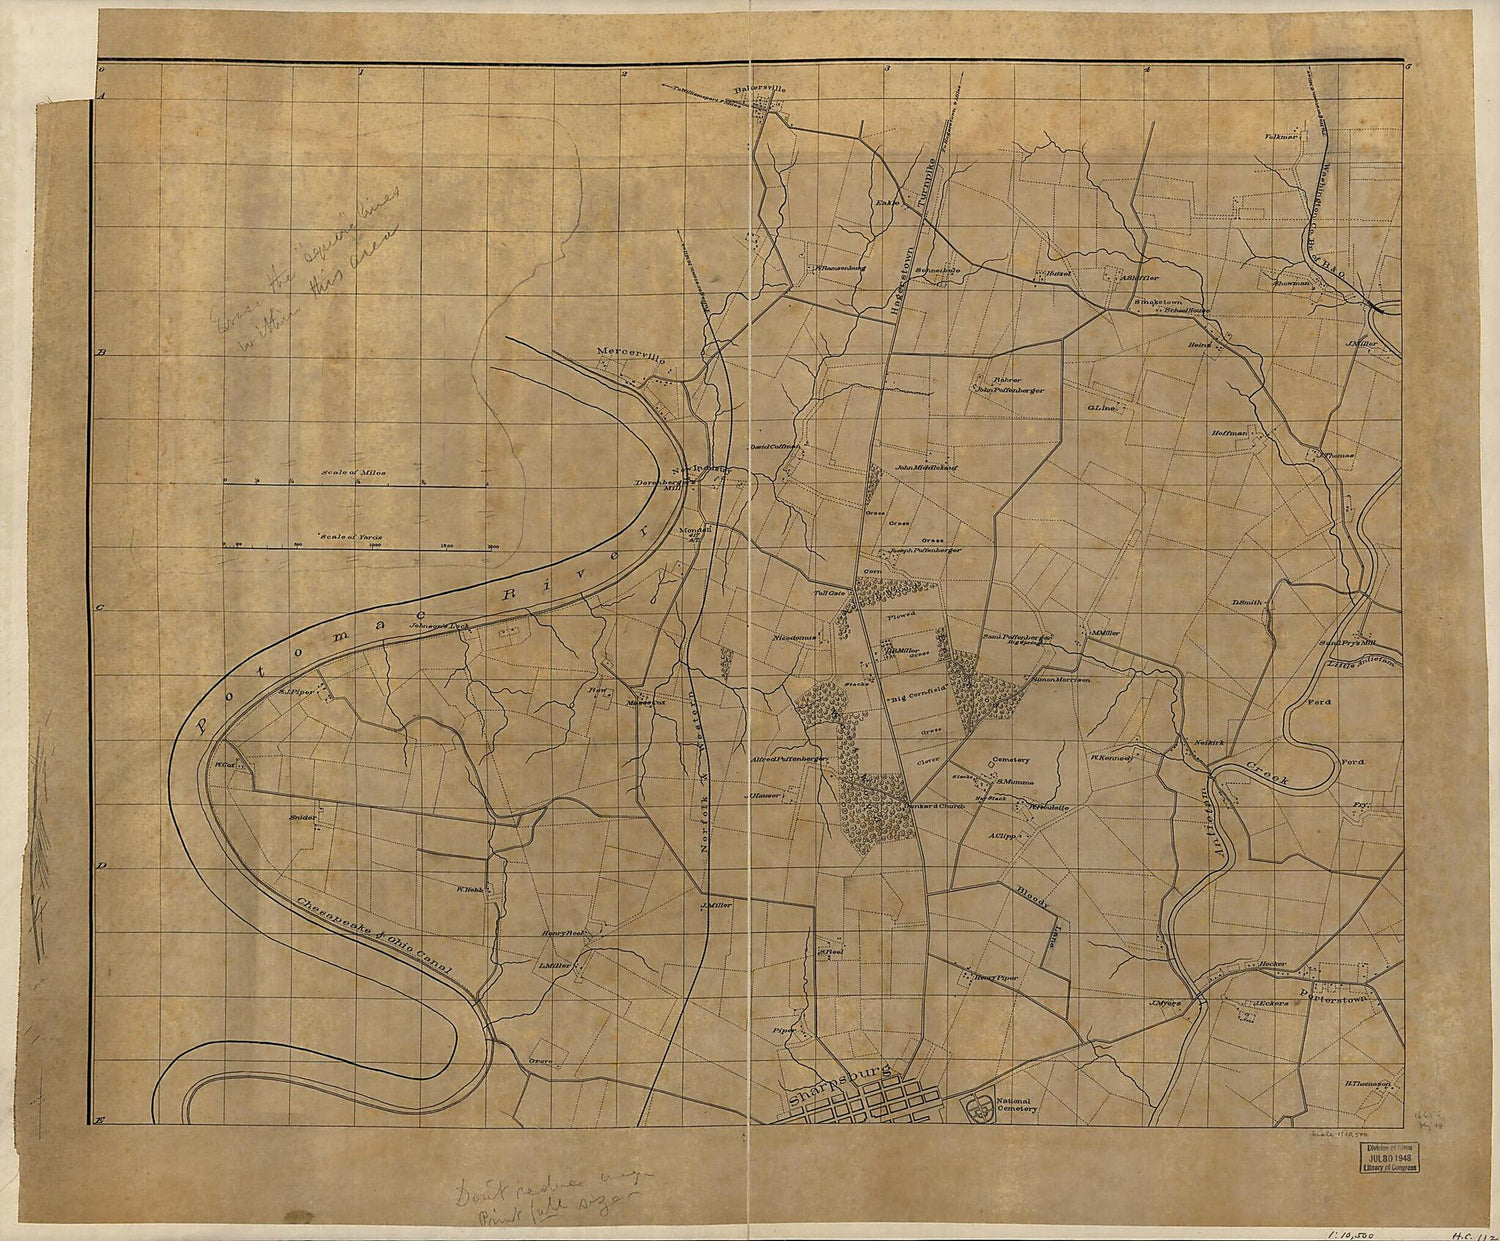 This old map of Northwest, Or No. 1 Sheet of Preliminary Map of Antietam (Sharpsburg) Battlefield from 1894 was created by Jedediah Hotchkiss, N. (Nathaniel) Michler in 1894